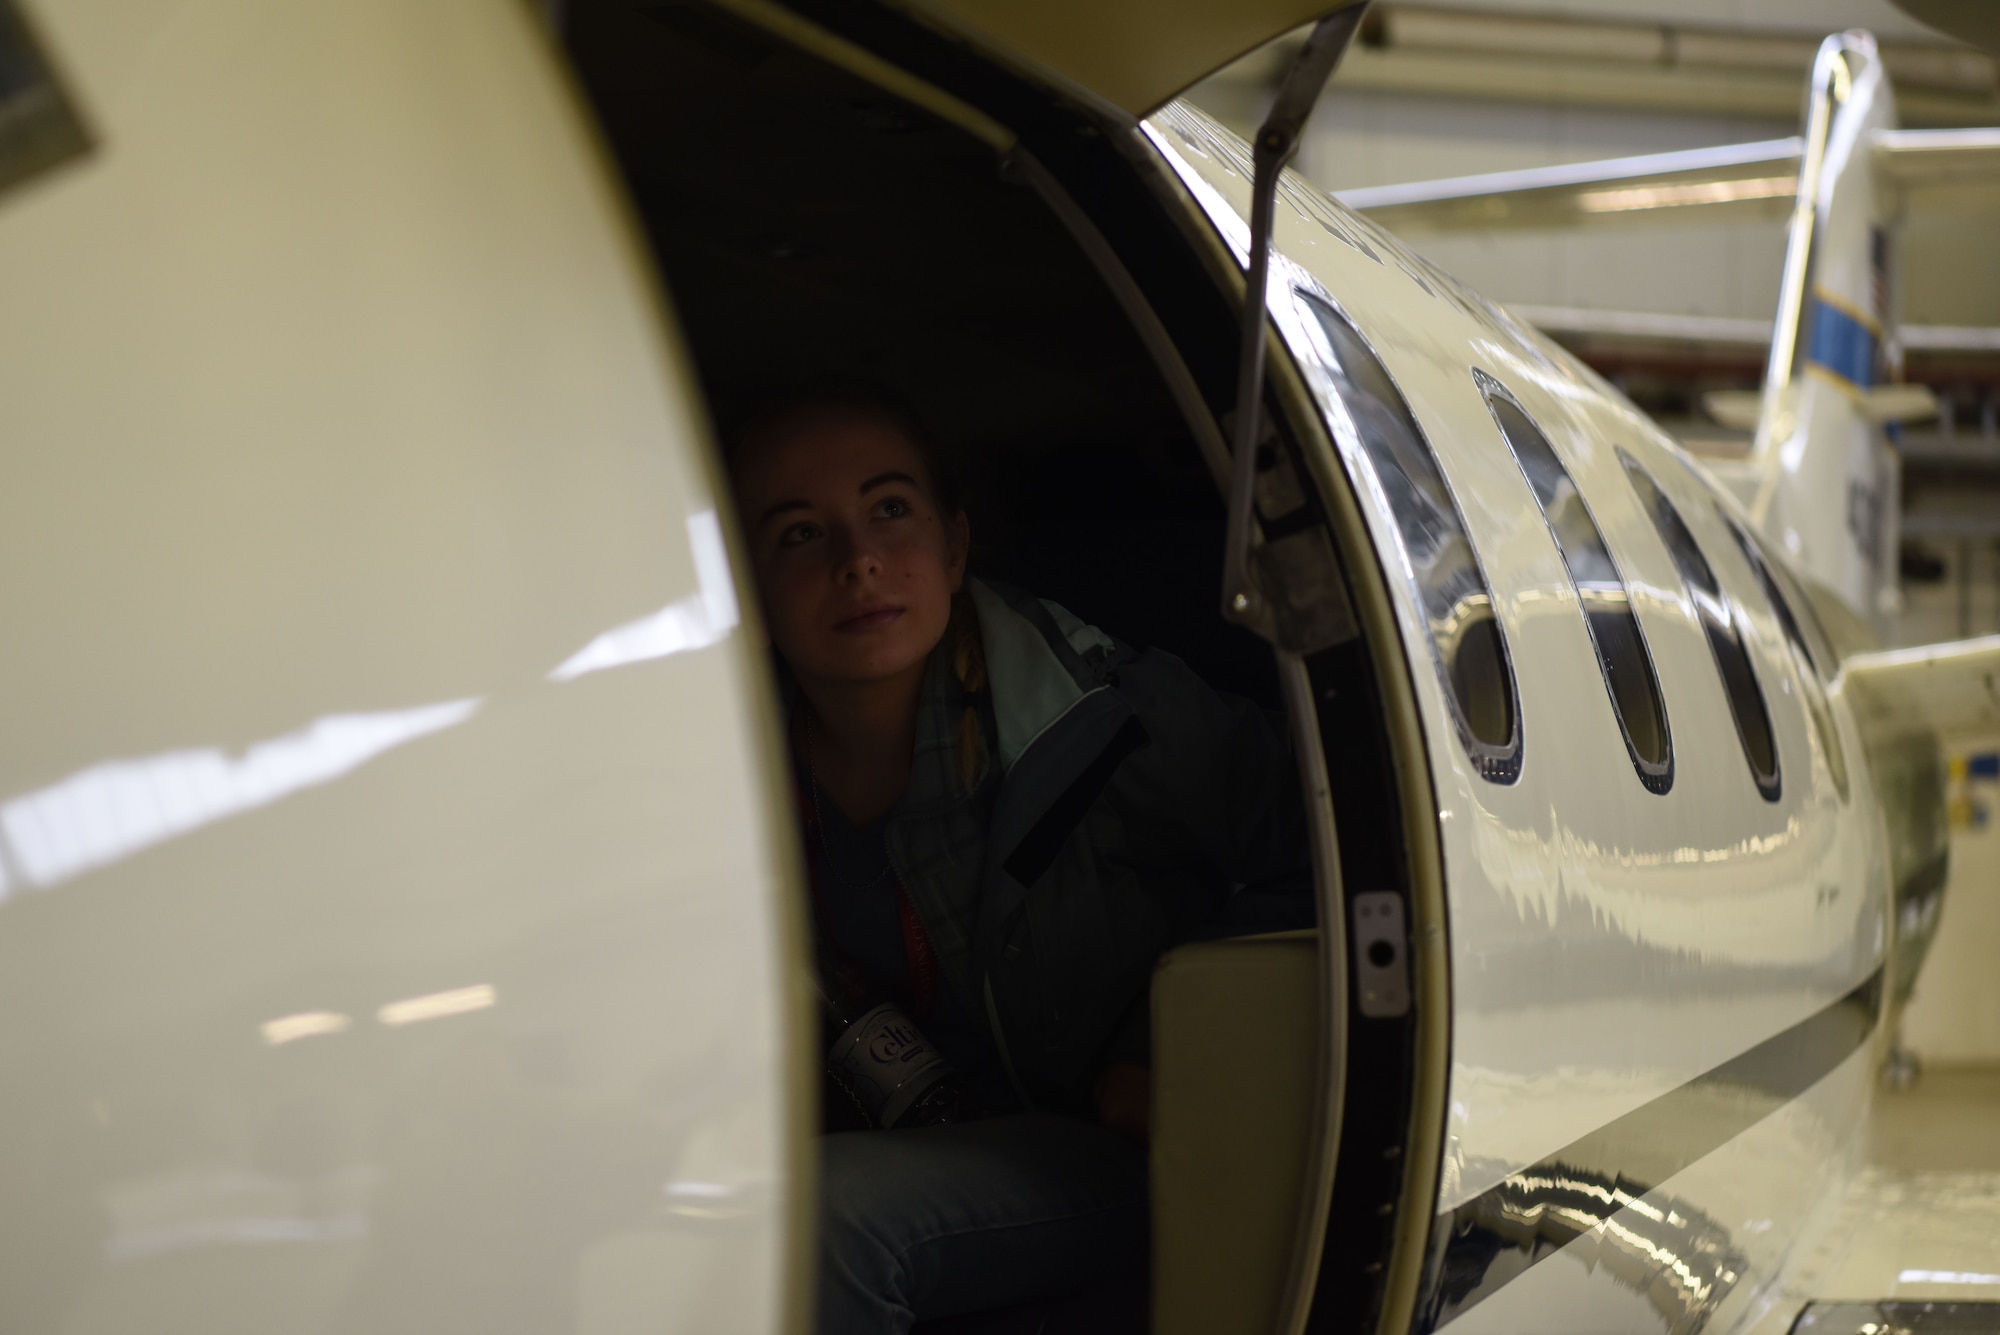 Chloe Perrow, Ramstein High school student sits in a static display of a C-21 Learjet at a Young Women in Aviation Day event on Ramstein Air Base, Germany, March, 9, 2019. A group of approximately 100 students from various schools around the Kaiserslautern Military Community came to Ramstein to learn about the ranging careers of women working in the aviation field.